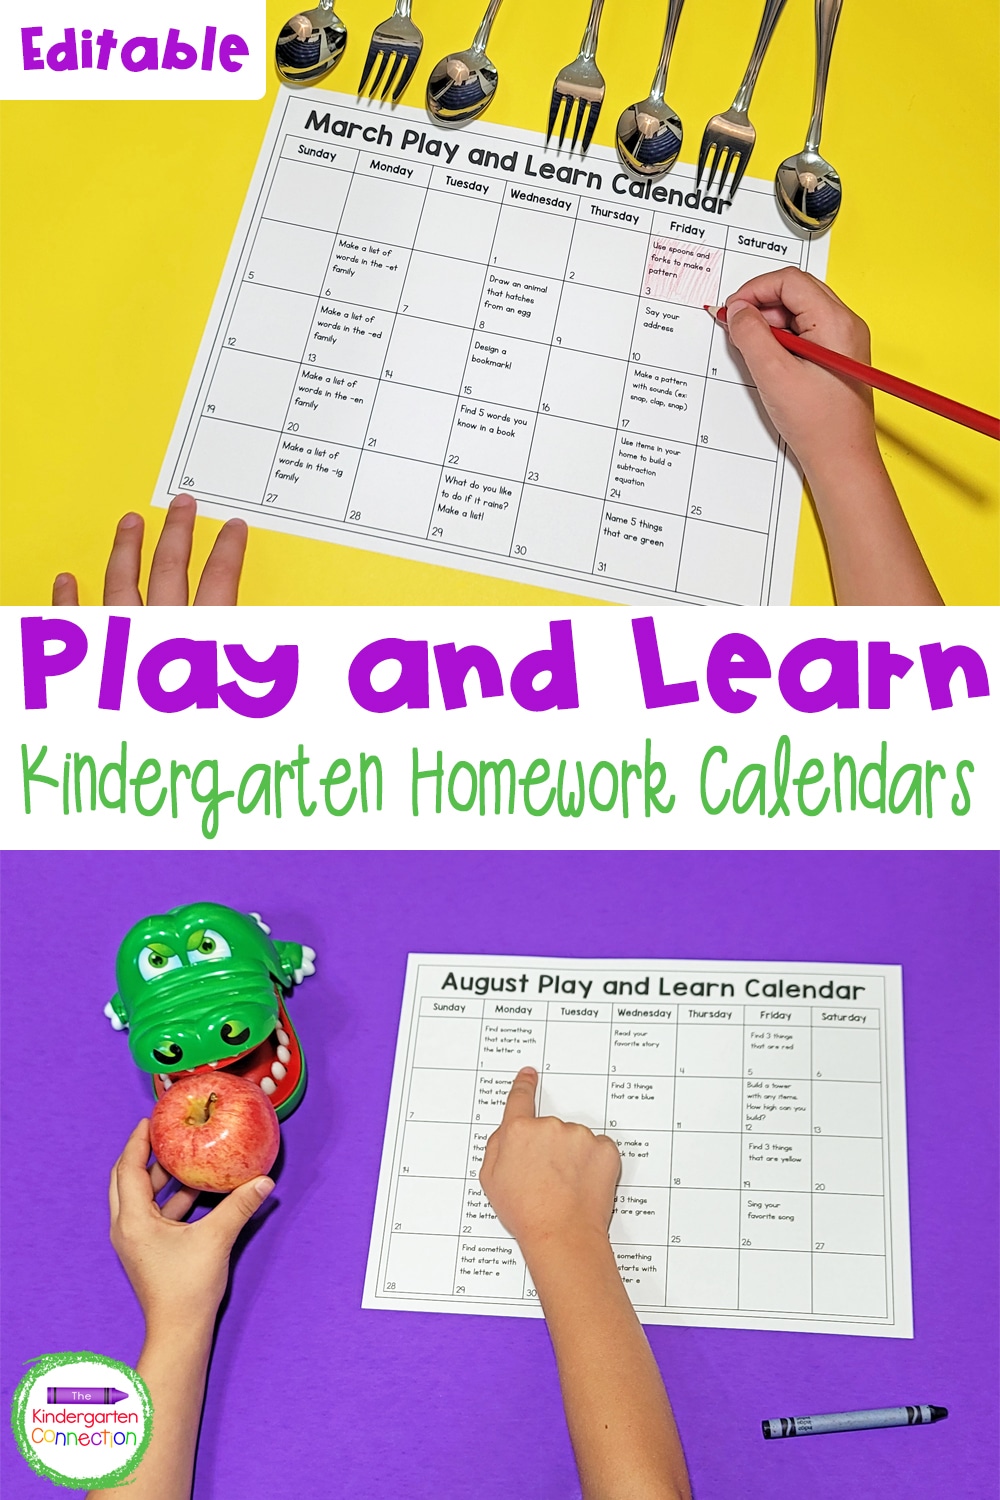 These EDITABLE Play and Learn Kindergarten Homework Calendars are a fun and effective way to encourage playful learning at home!